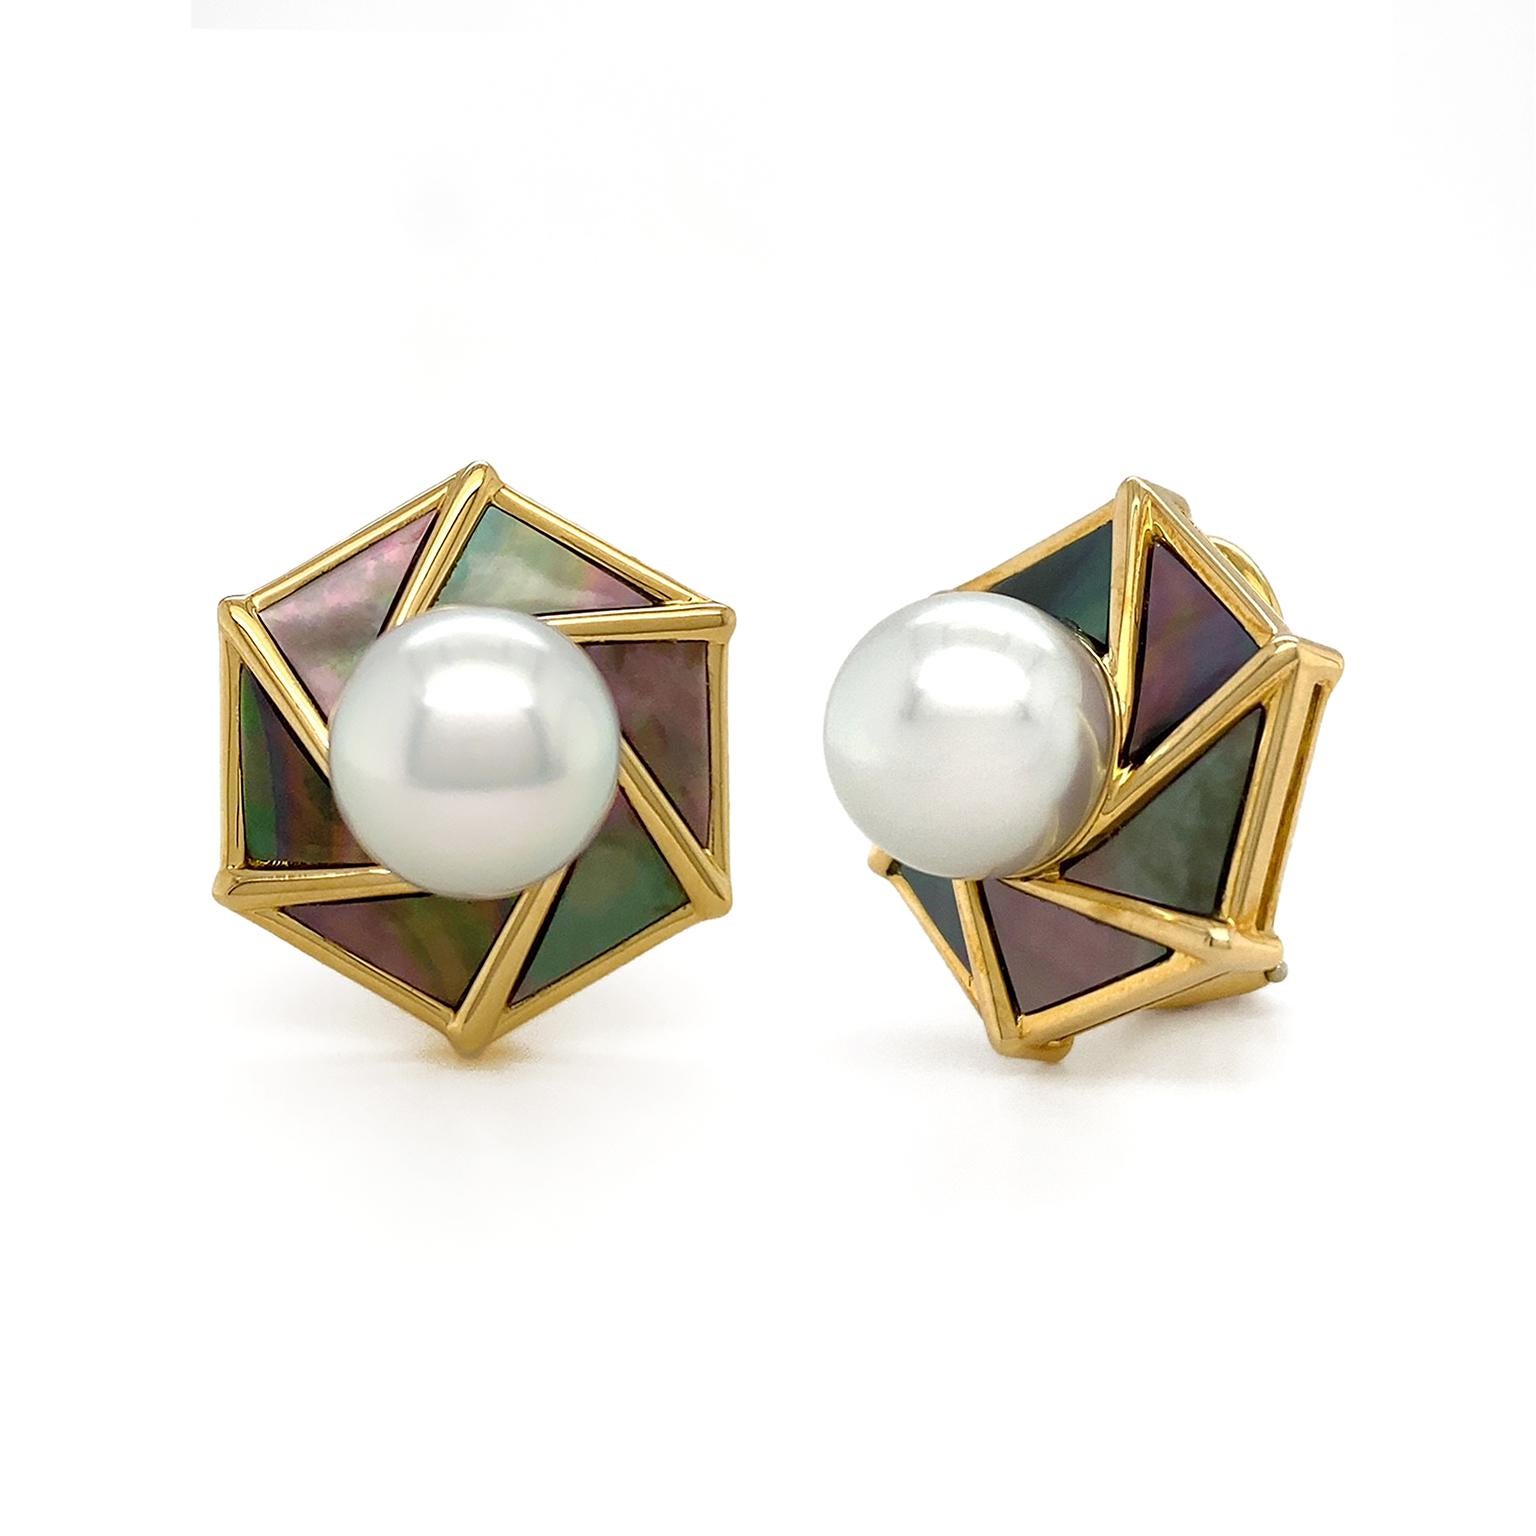 The opalescent sheen of pearls is showcased in these earrings. Mother of pearl is the foundation, which features multicolor over the black hue. 18k yellow gold borders the pearl and slender beams extended to rotate around a south sea pearl in the